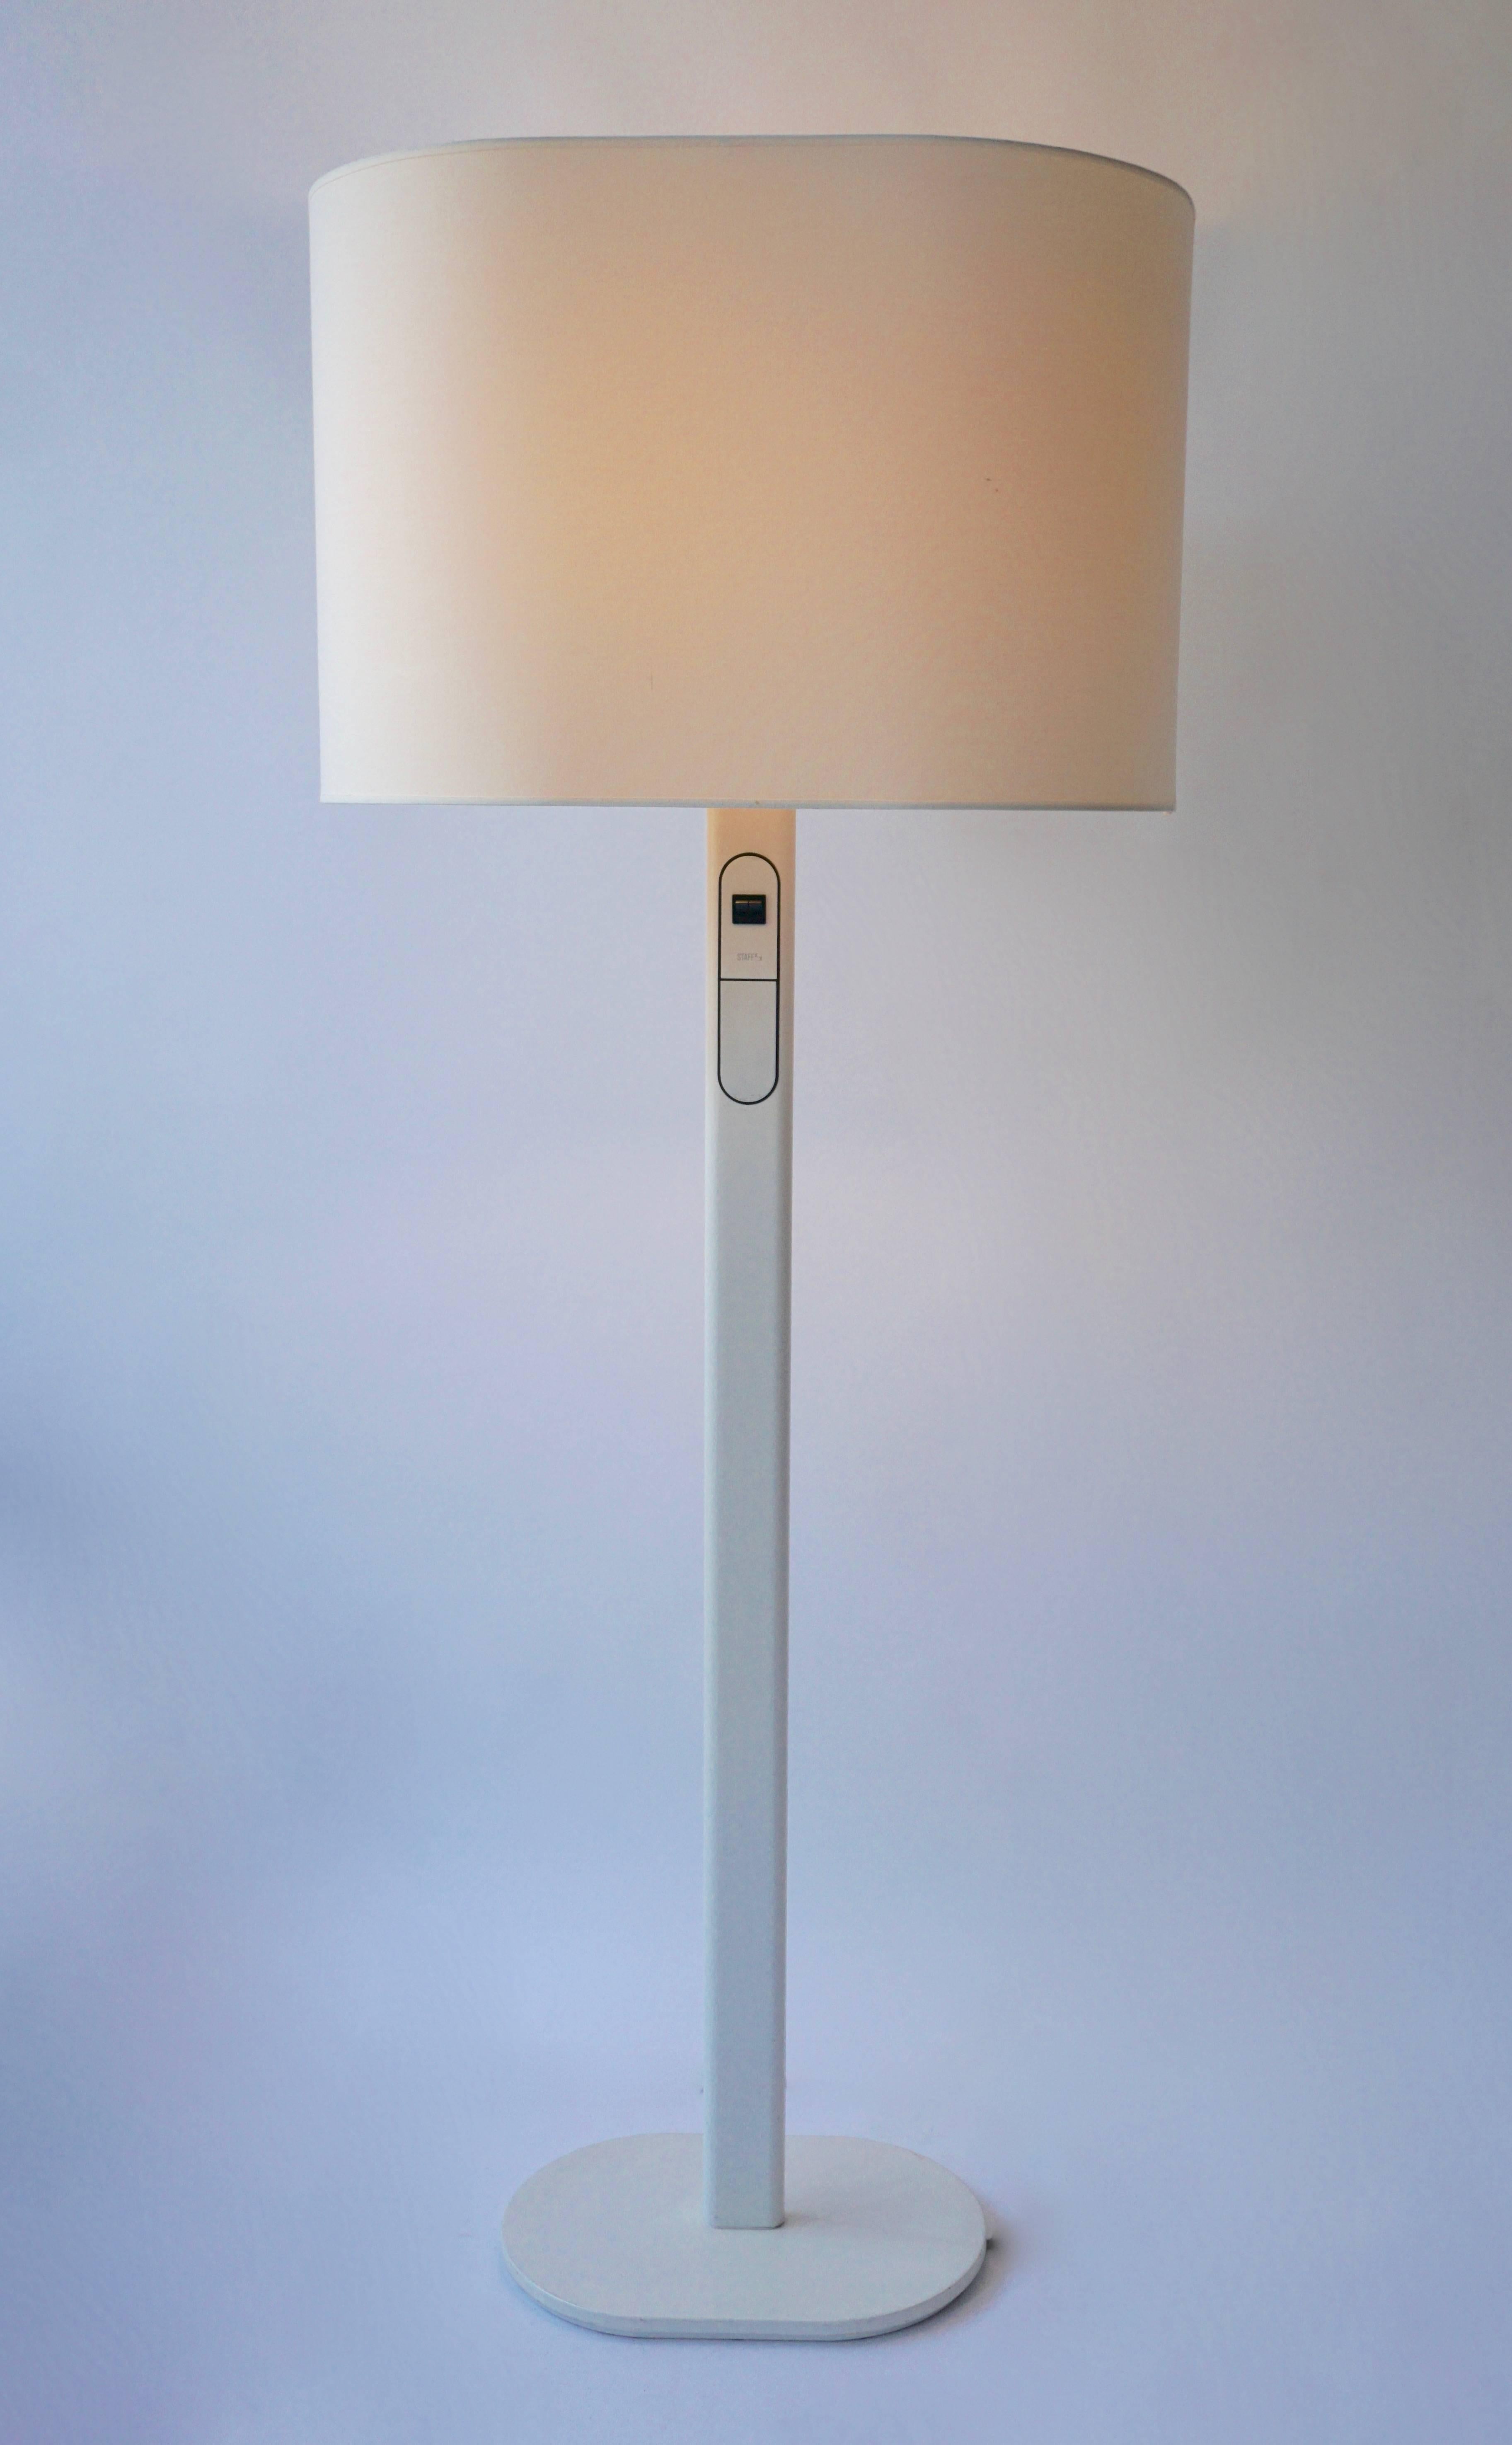 Rare floor lamp by Staff, Germany.
The dimmer is built into the lamp and the top lamp can be dimmed separately.
An uncommon functional form in Fine vintage condition.
Measures: Height 152 cm.